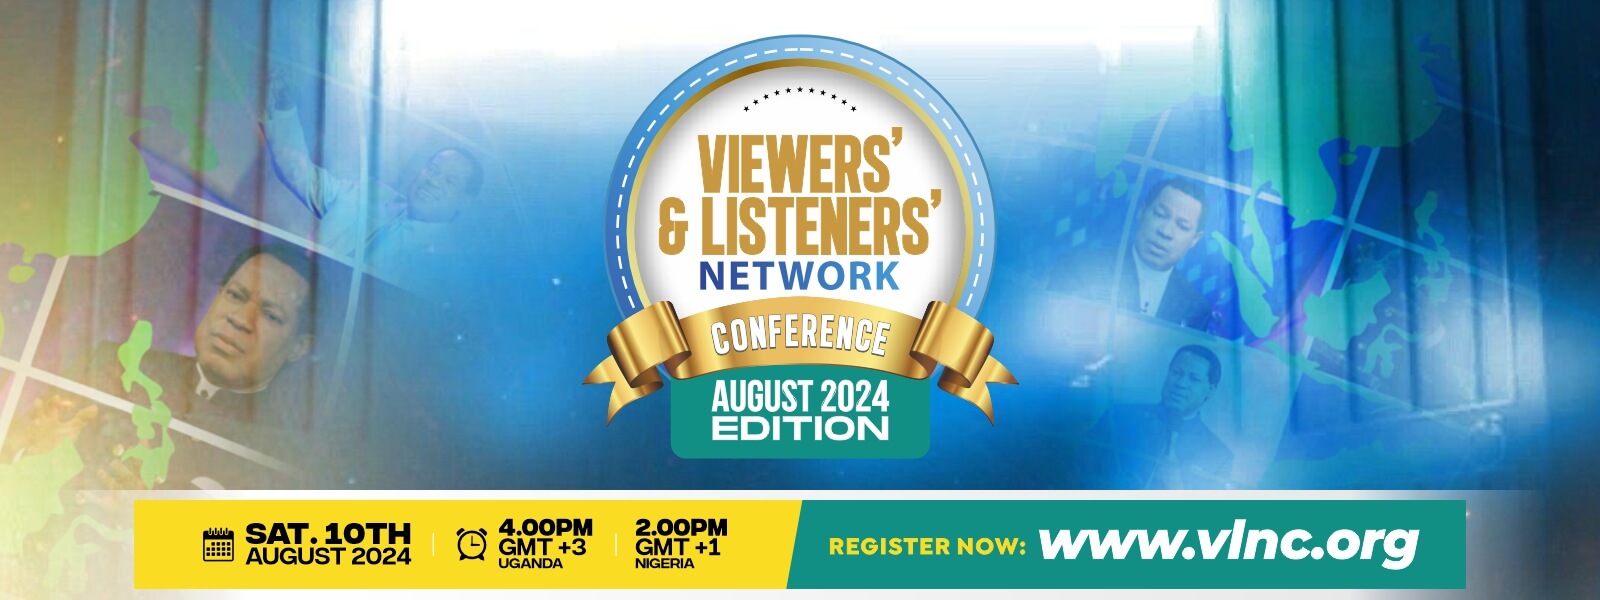 VIEWERS AND LISTENERS NETWORK CONFERENCE AUGUST EDITION 